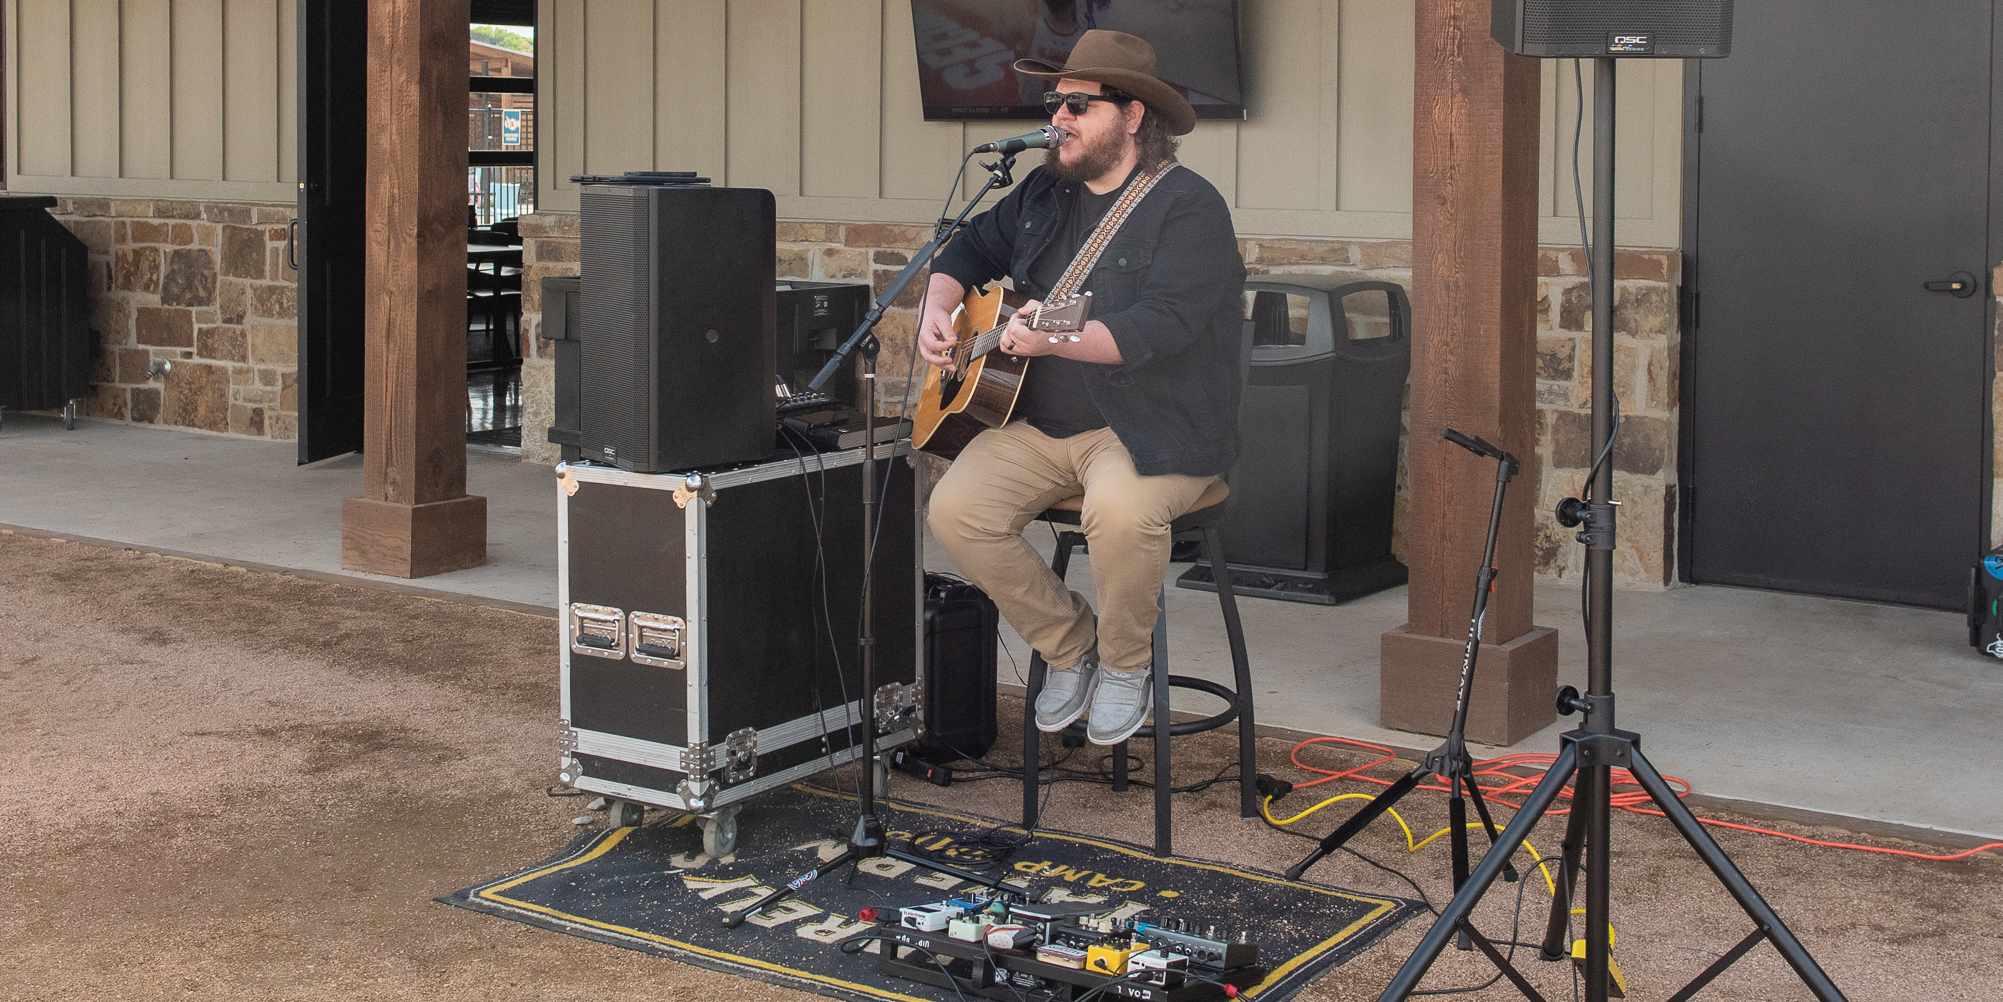 A live act performing outside at the patio of Squirrely's Tavern